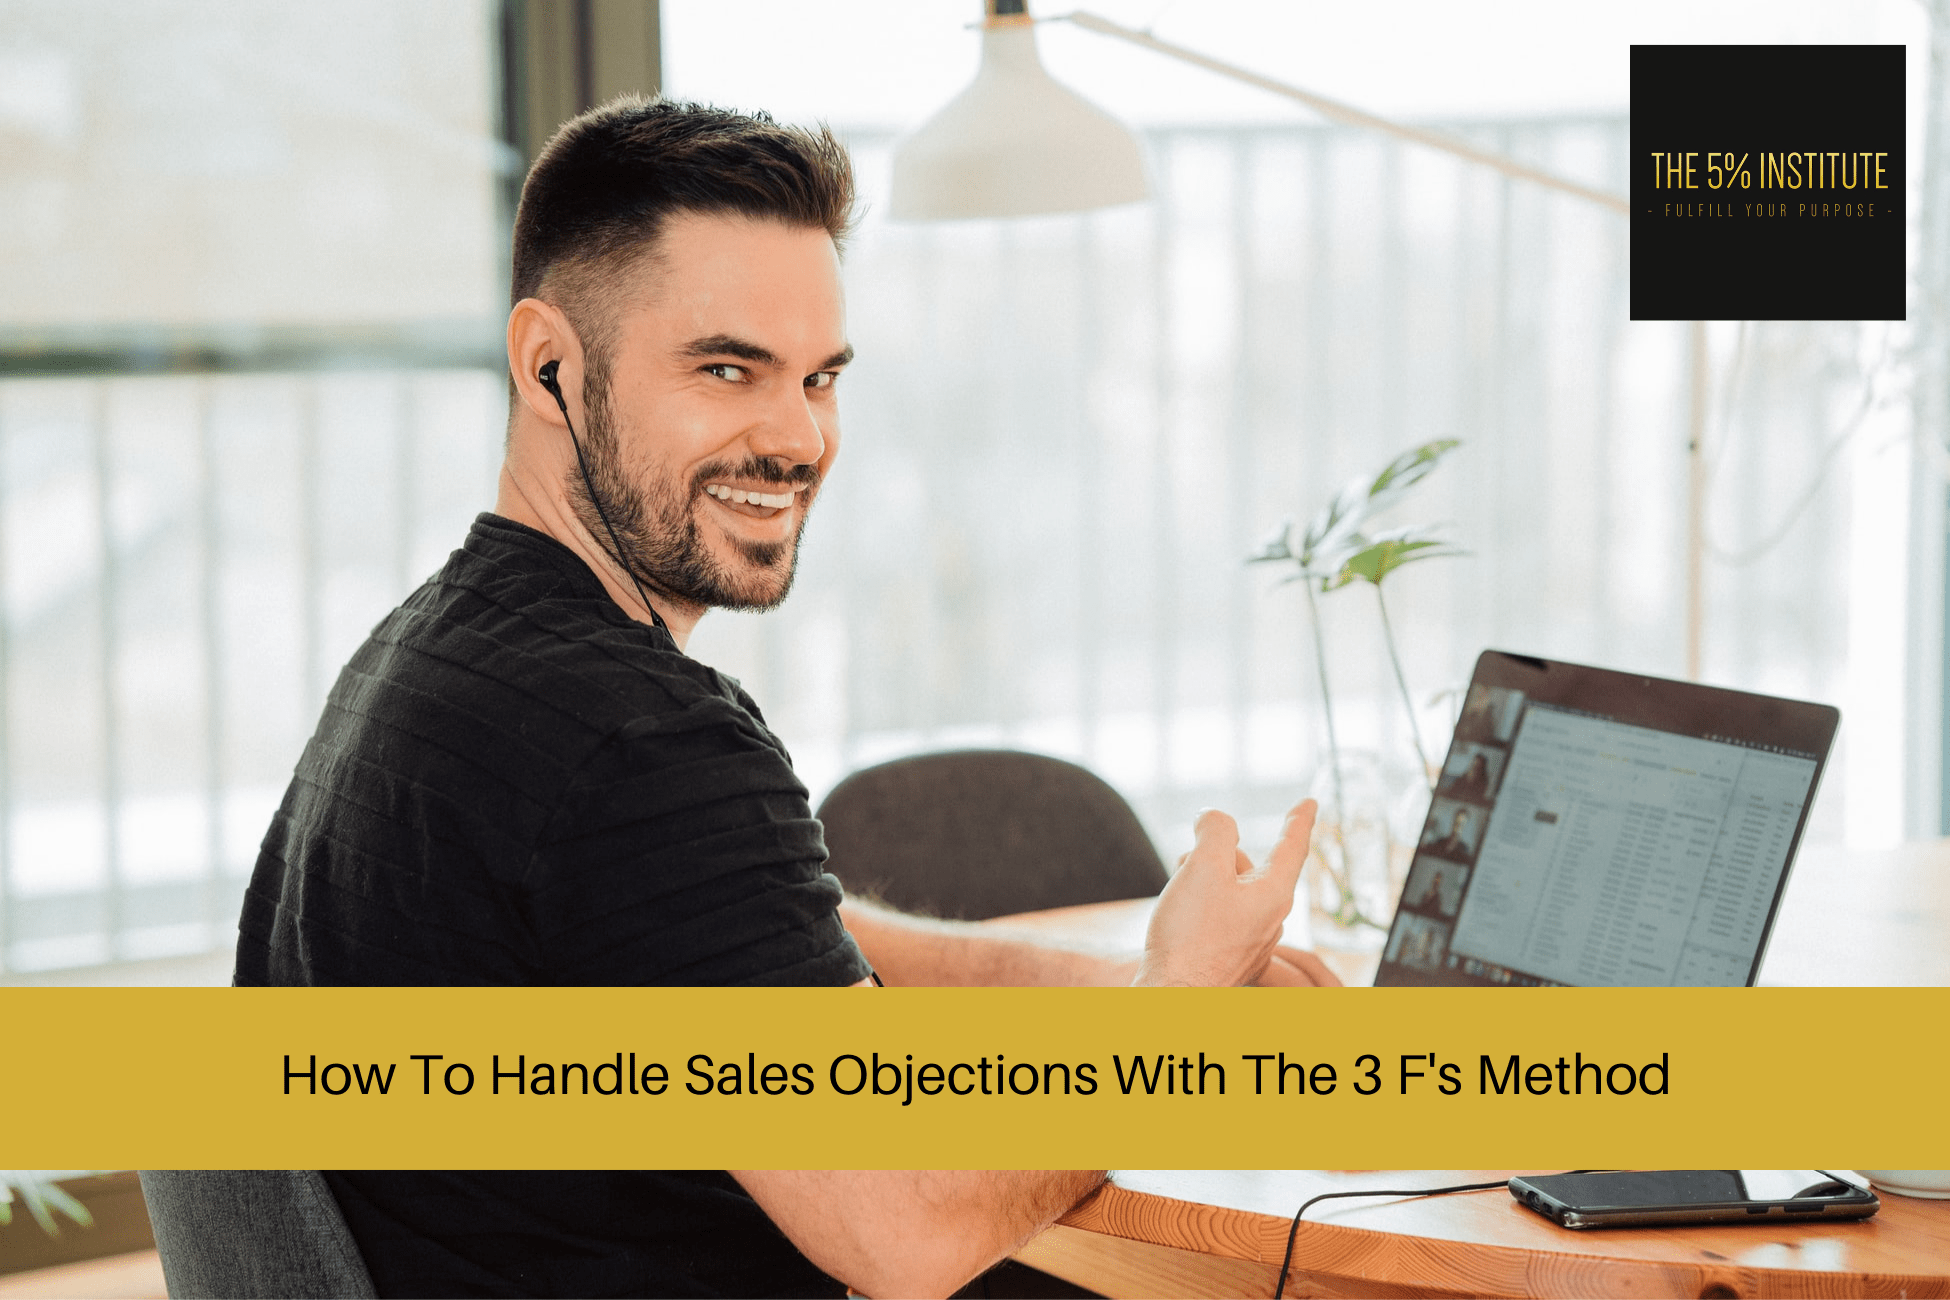 How To Handle Sales Objections With The 3 F's Method